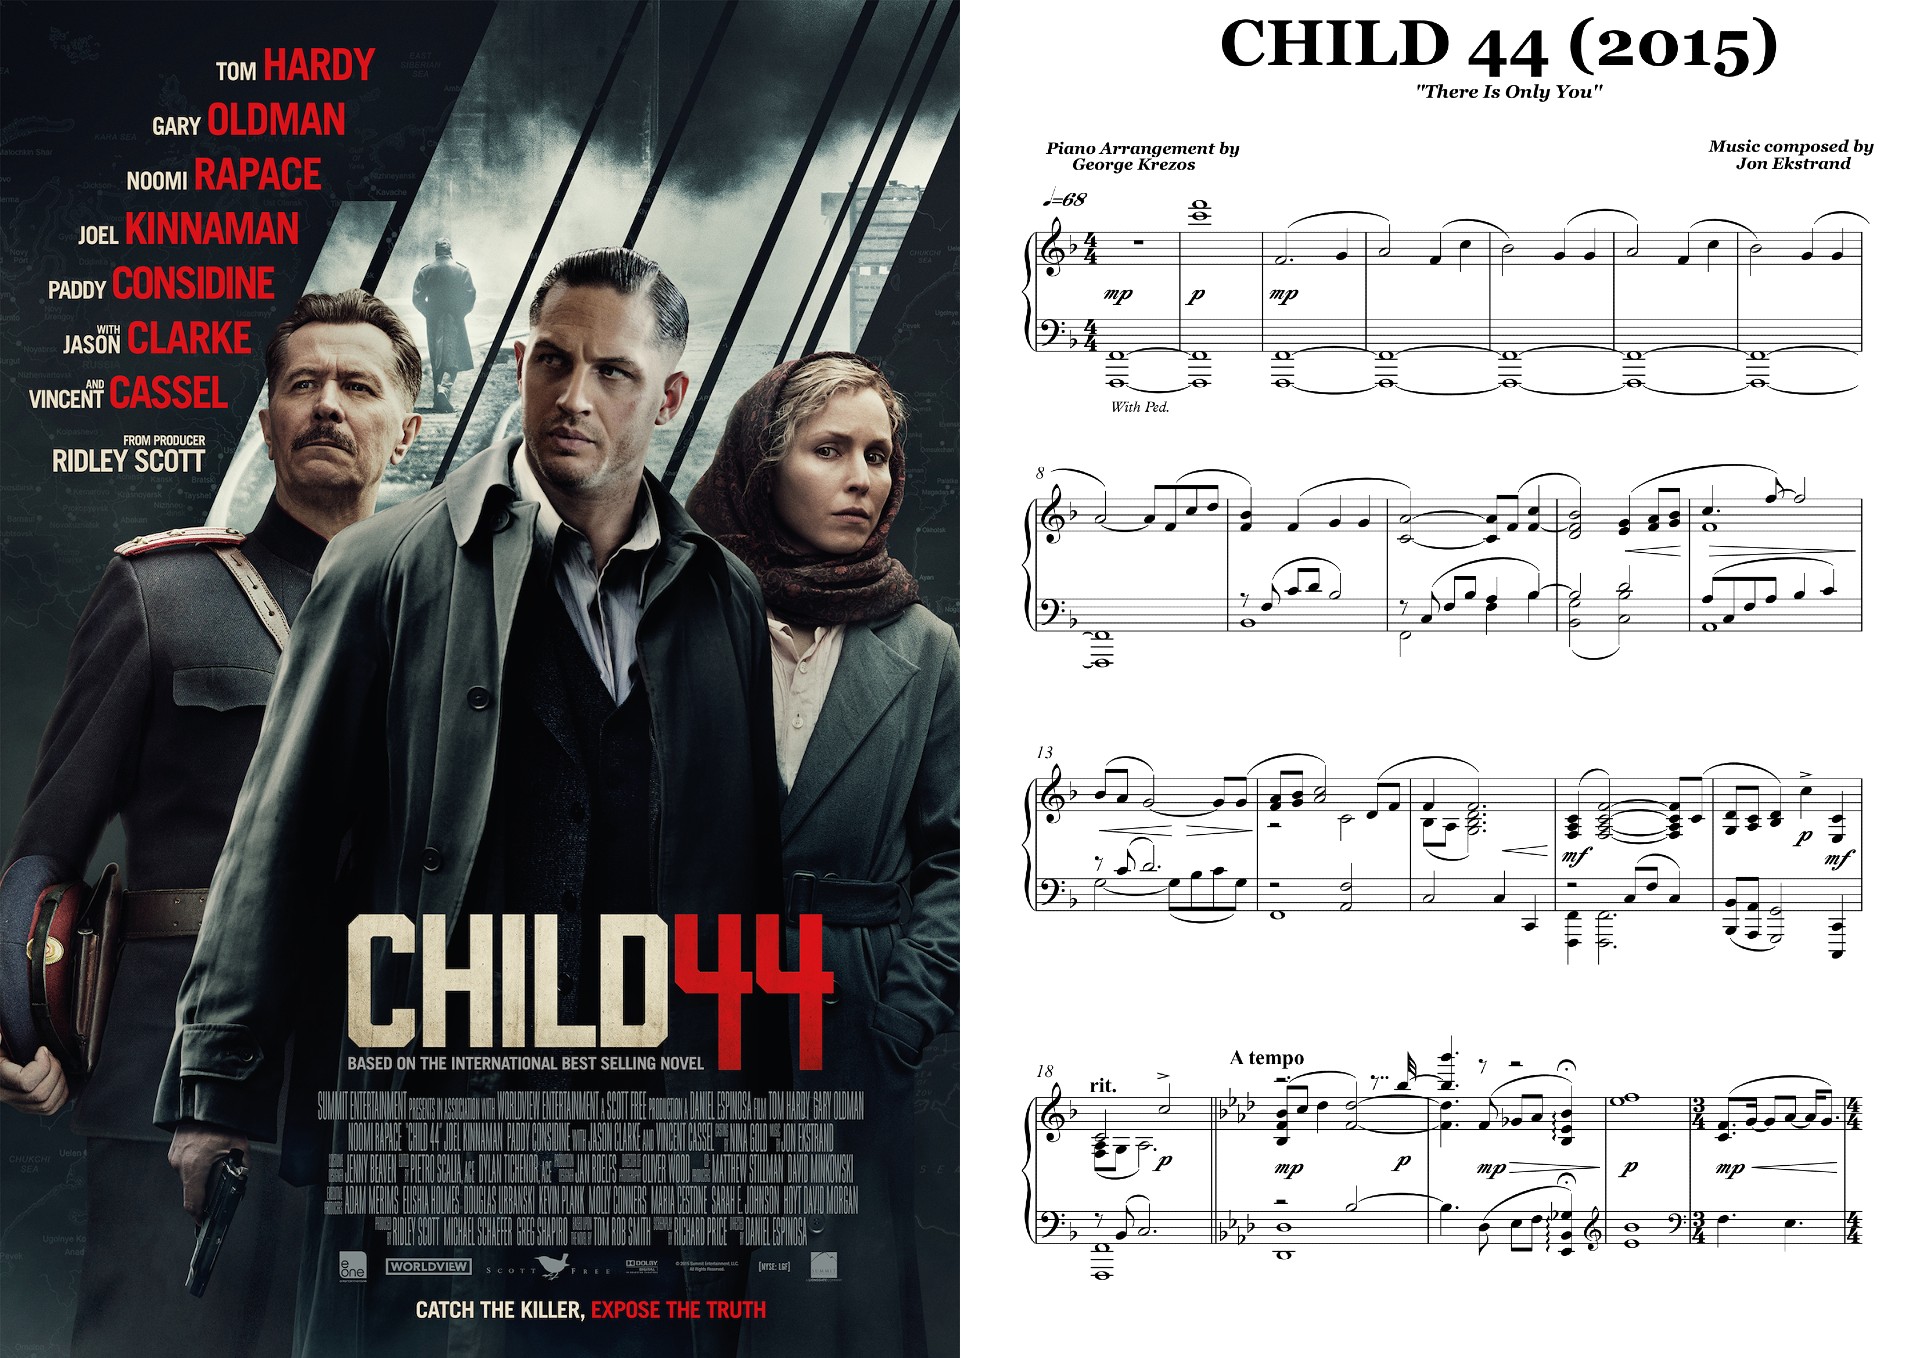 CHILD 44 - There Is Only You.jpg